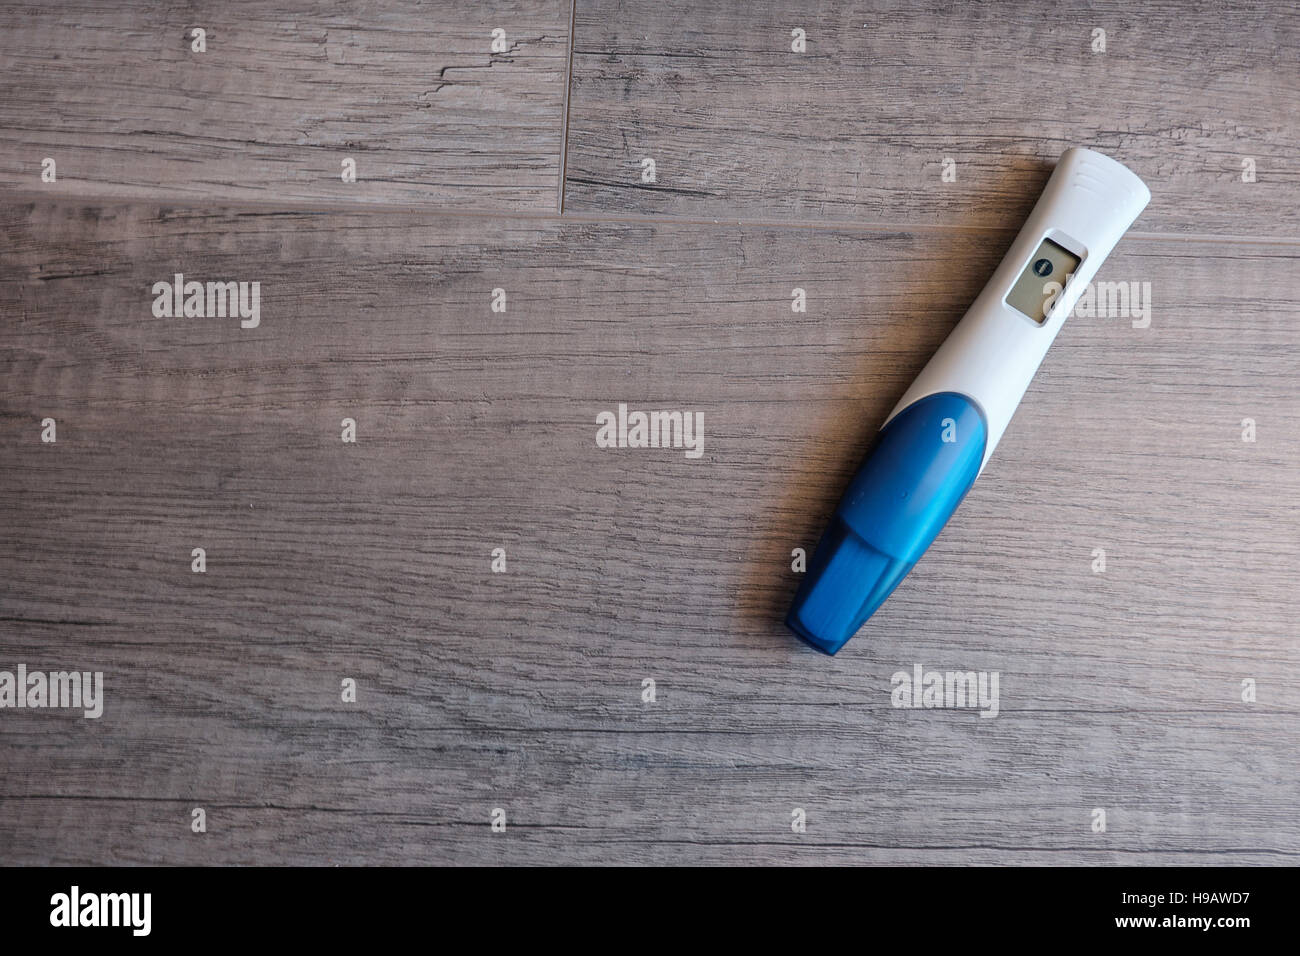 Digital pregnancy test with negative result on wooden background Stock Photo